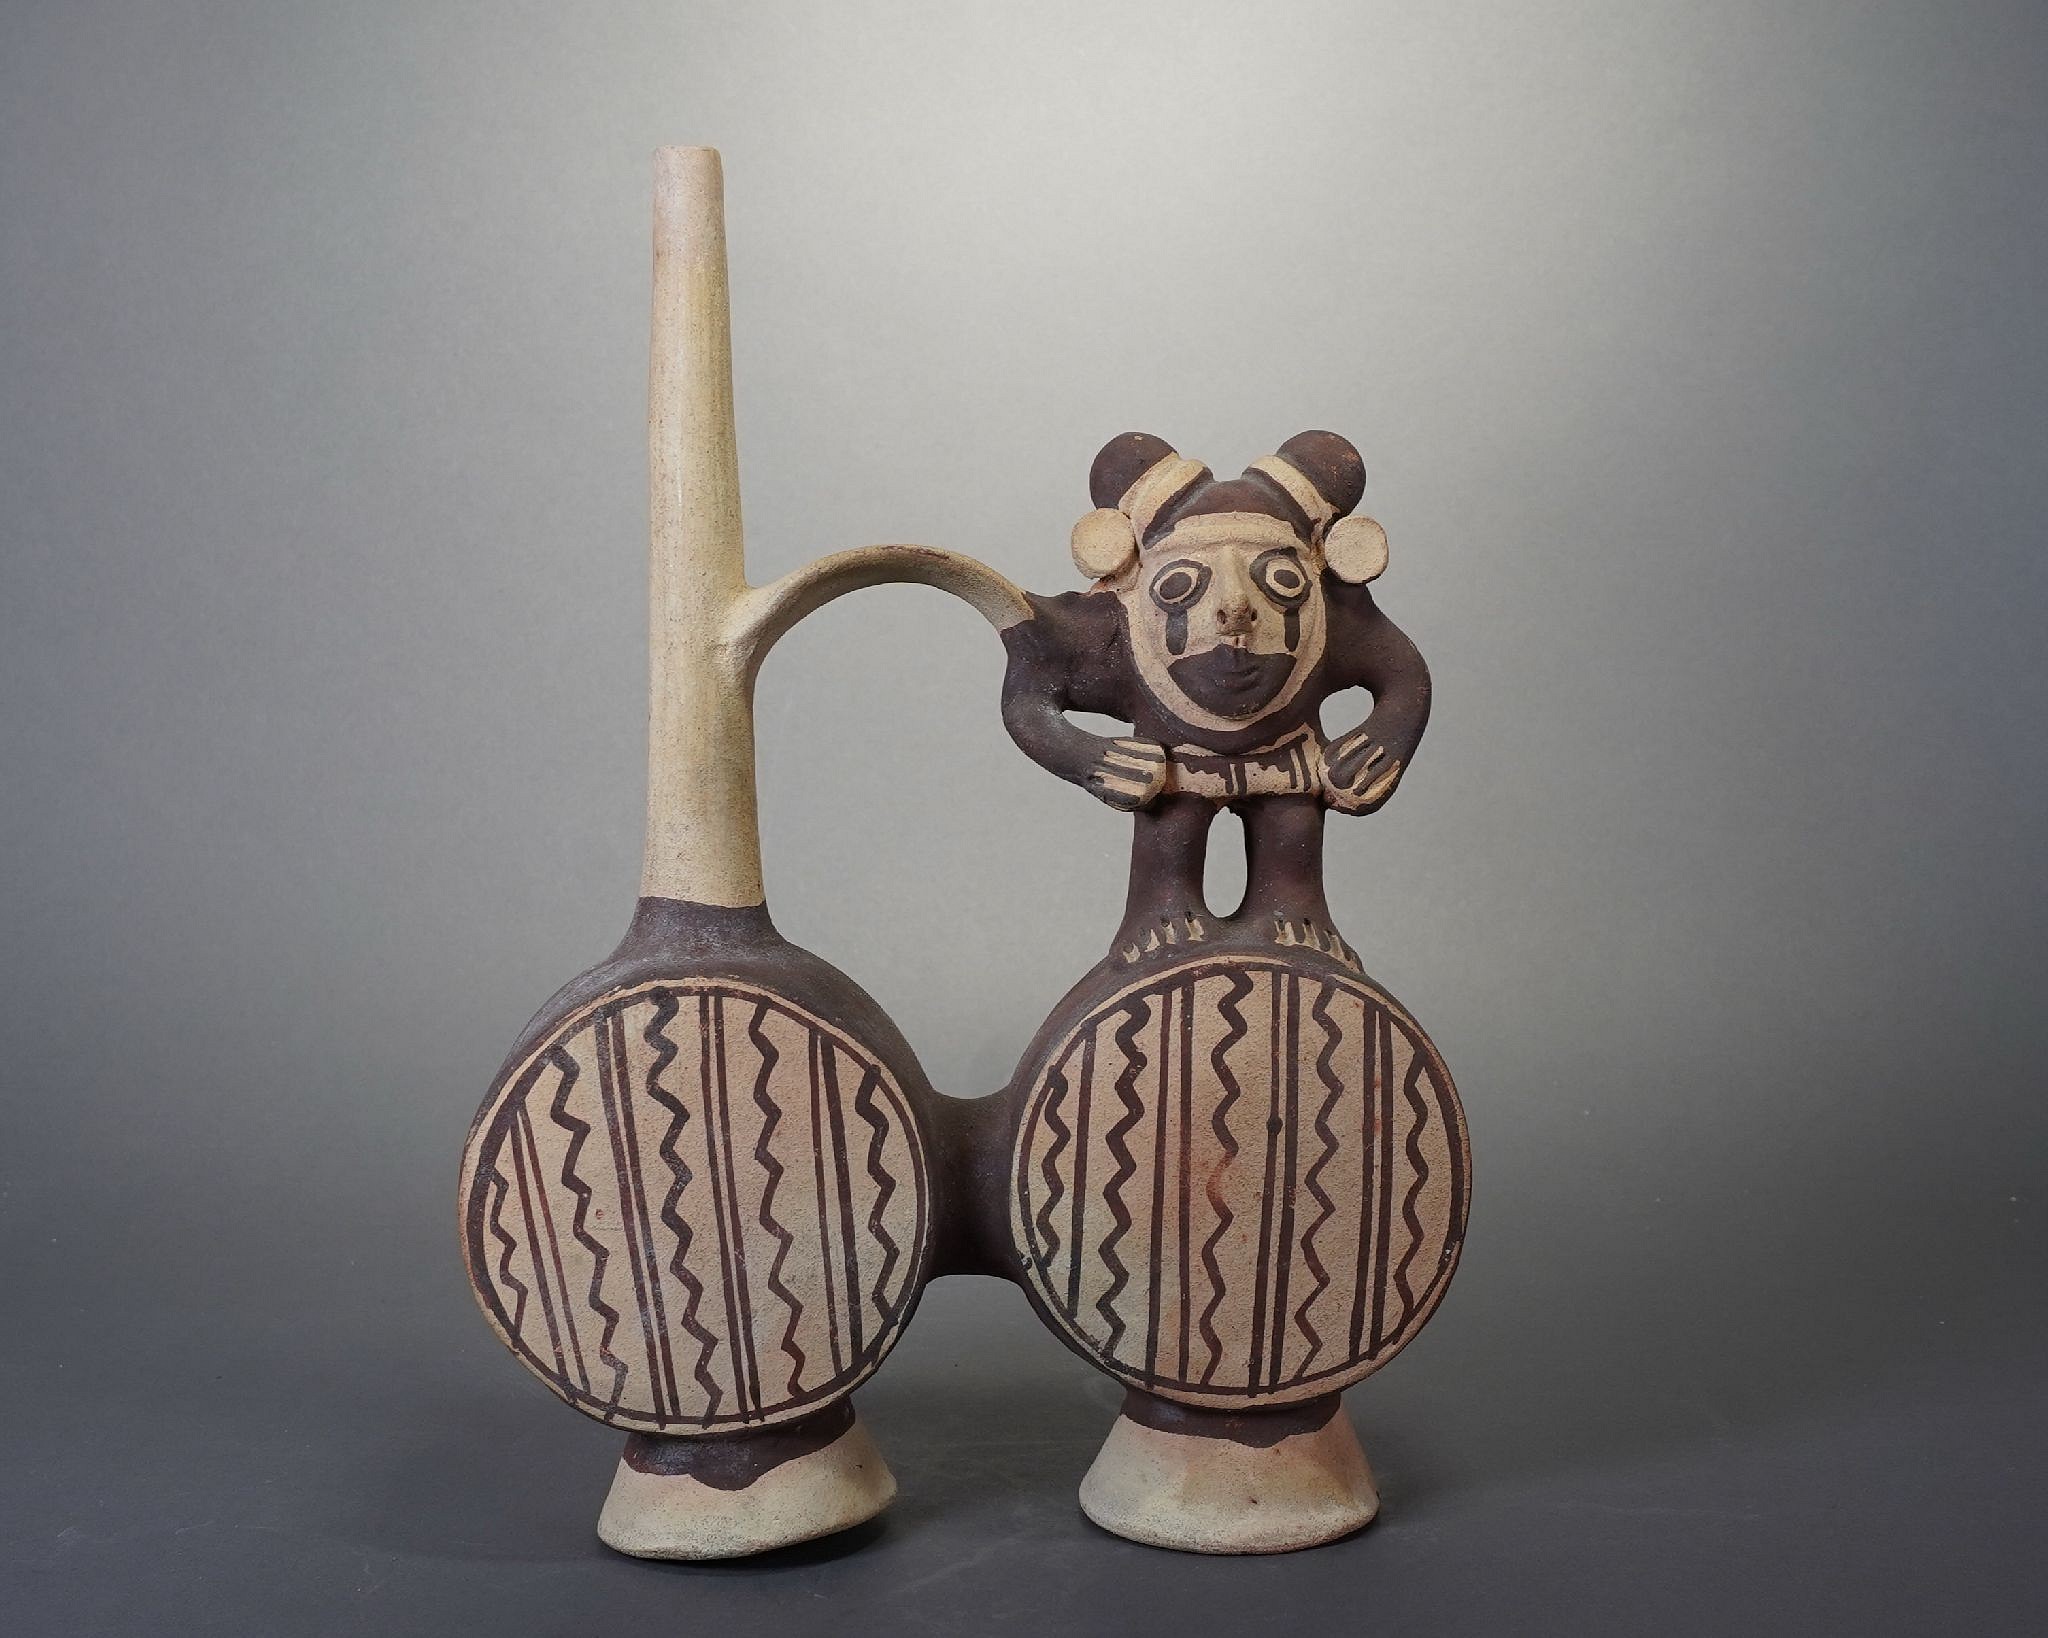 Peru, Chancay Double-Chambered Whistling Vessel with Animal Impersonator
The Chancay people were known for their ceramic workshops, where series of similar items were produced in groups.  This bridge-spout vessel has two chambers and is painted with alternating straight and wavy lines.  The figure sitting atop the vessel is an Animal Impersonator of a monkey.  “Animal Impersonator” is a term used by Pre-Colombian scholars to refer to a shaman who dresses as a certain animal to embody the mythological characteristics associated with that animal.  Monkeys, who dwell at the top of the forest canopy in the Amazon, are associated with ancestral secrets in Andean mythology.  This shaman has a hairstyle arranged in two coils to resemble monkey ears, as well as white ear spools.  He is hunched over and holds a weaving in his arms. 
This vessel may have been used to pour a psychoactive brew as part of a shamanic rite.   When brew was poured, the air moved from one chamber to the other, creating a whistling sound.  The tone of the whistle was created by the specific shape of the resonance cavity.  Whistling sounds would have enhanced the shamanic ritual.  According to author Daniel K. Stat’s article Ancient Sounds: The Whistling Vessels of Peru, “the psycho-acoustical effects appear to be created by low frequencies or difference tones, or possibly the interaction of harmonic principles, which are produced when several vessels from a specific culture are played simultaneously.”  
This vessel would also have been intended for its owner for use in the afterlife. 
Media: Ceramic
Dimensions: Height: 10 1/2" x Width: 7"
$1,400
n9047